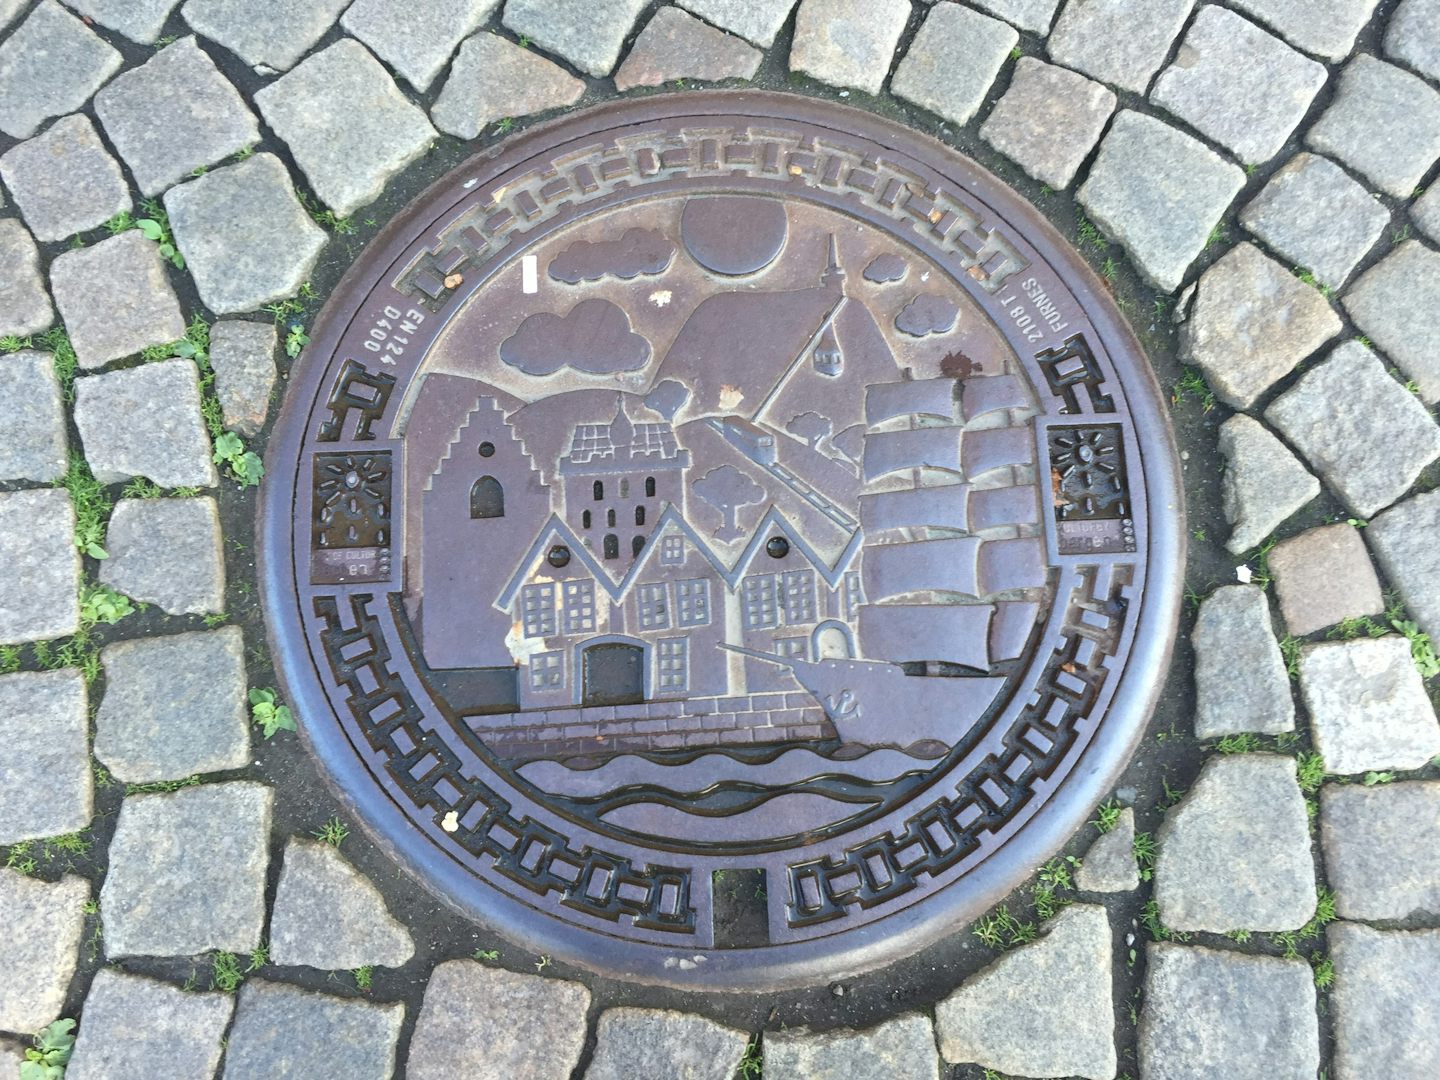 Sewer cover in Bergen